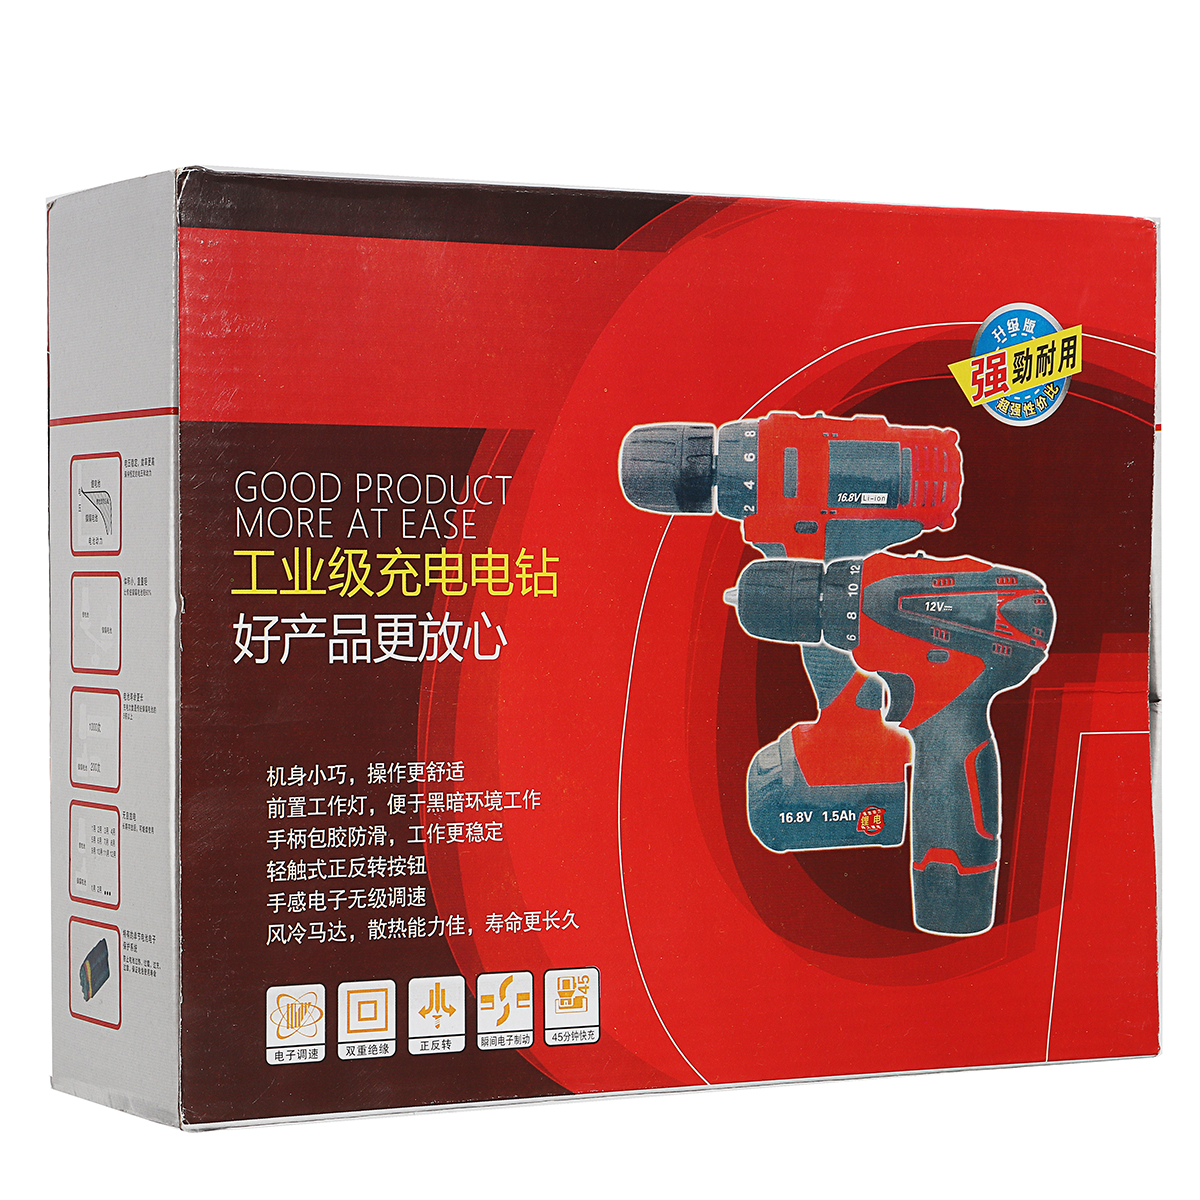 110V-240V-Cordless-Electric-Screwdriver-1-Battery-1-Charger-Drilling-Punching-Power-Tools-1287724-10